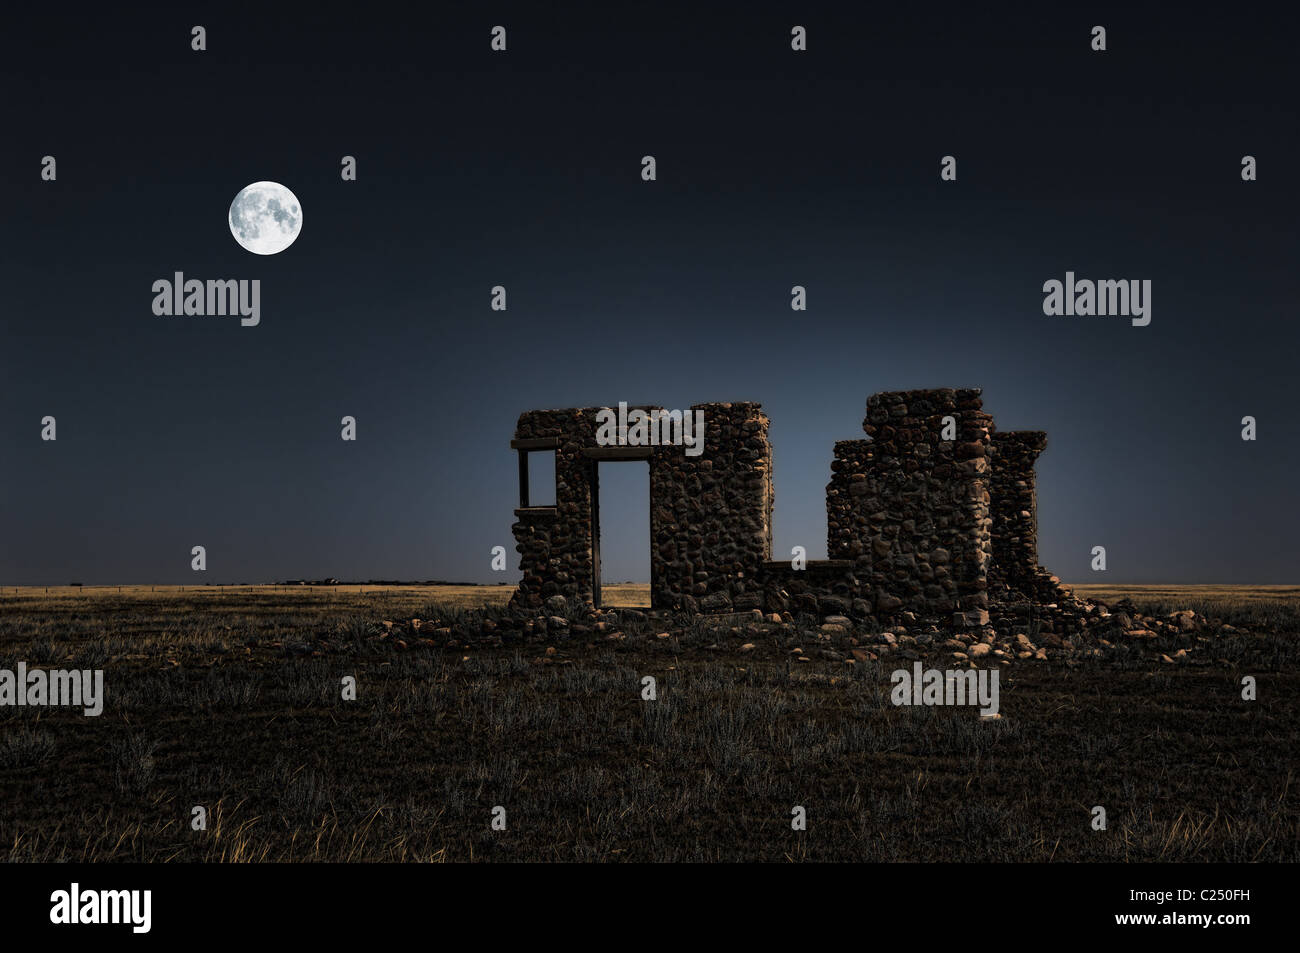 A surrealistic image of the ruins of an old stone farmhouse at night with the moon in the background. Stock Photo